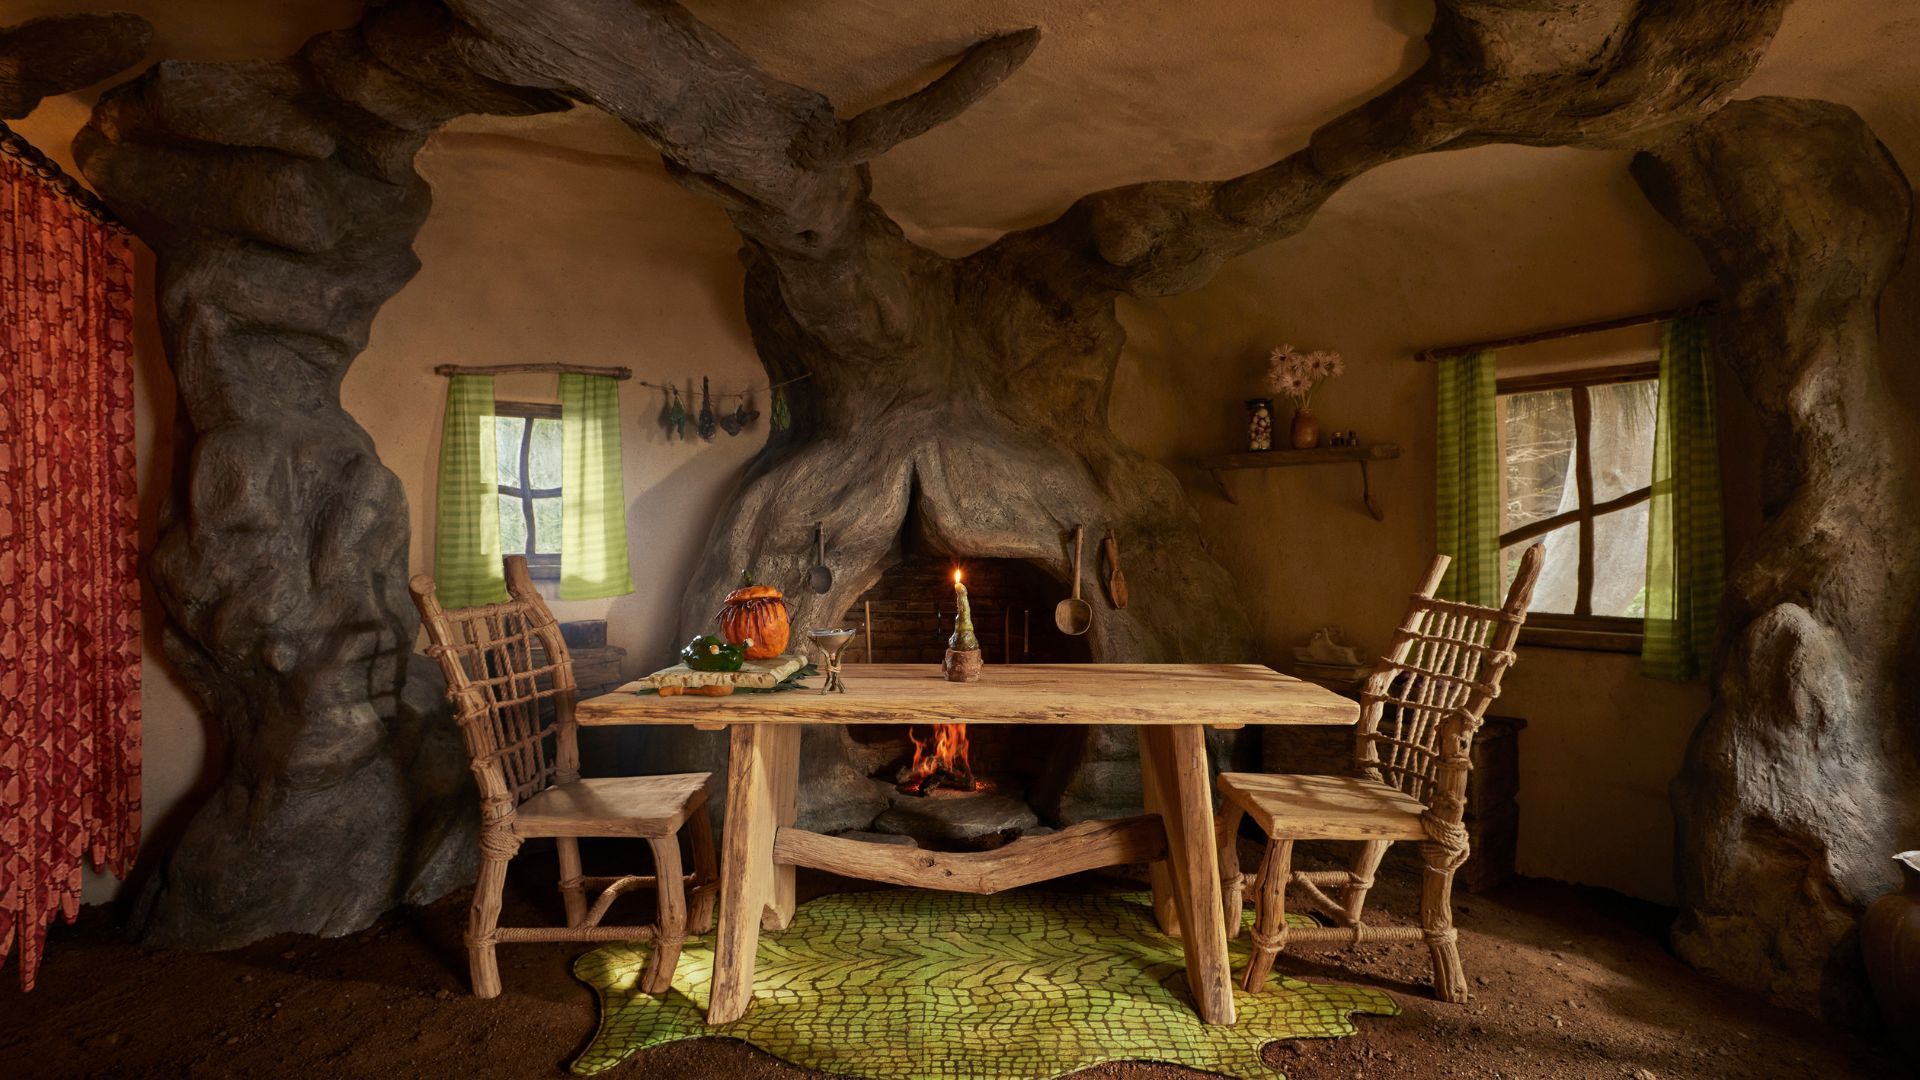 You Can Stay At Shrek's Swamp This October, Thanks To Airbnb